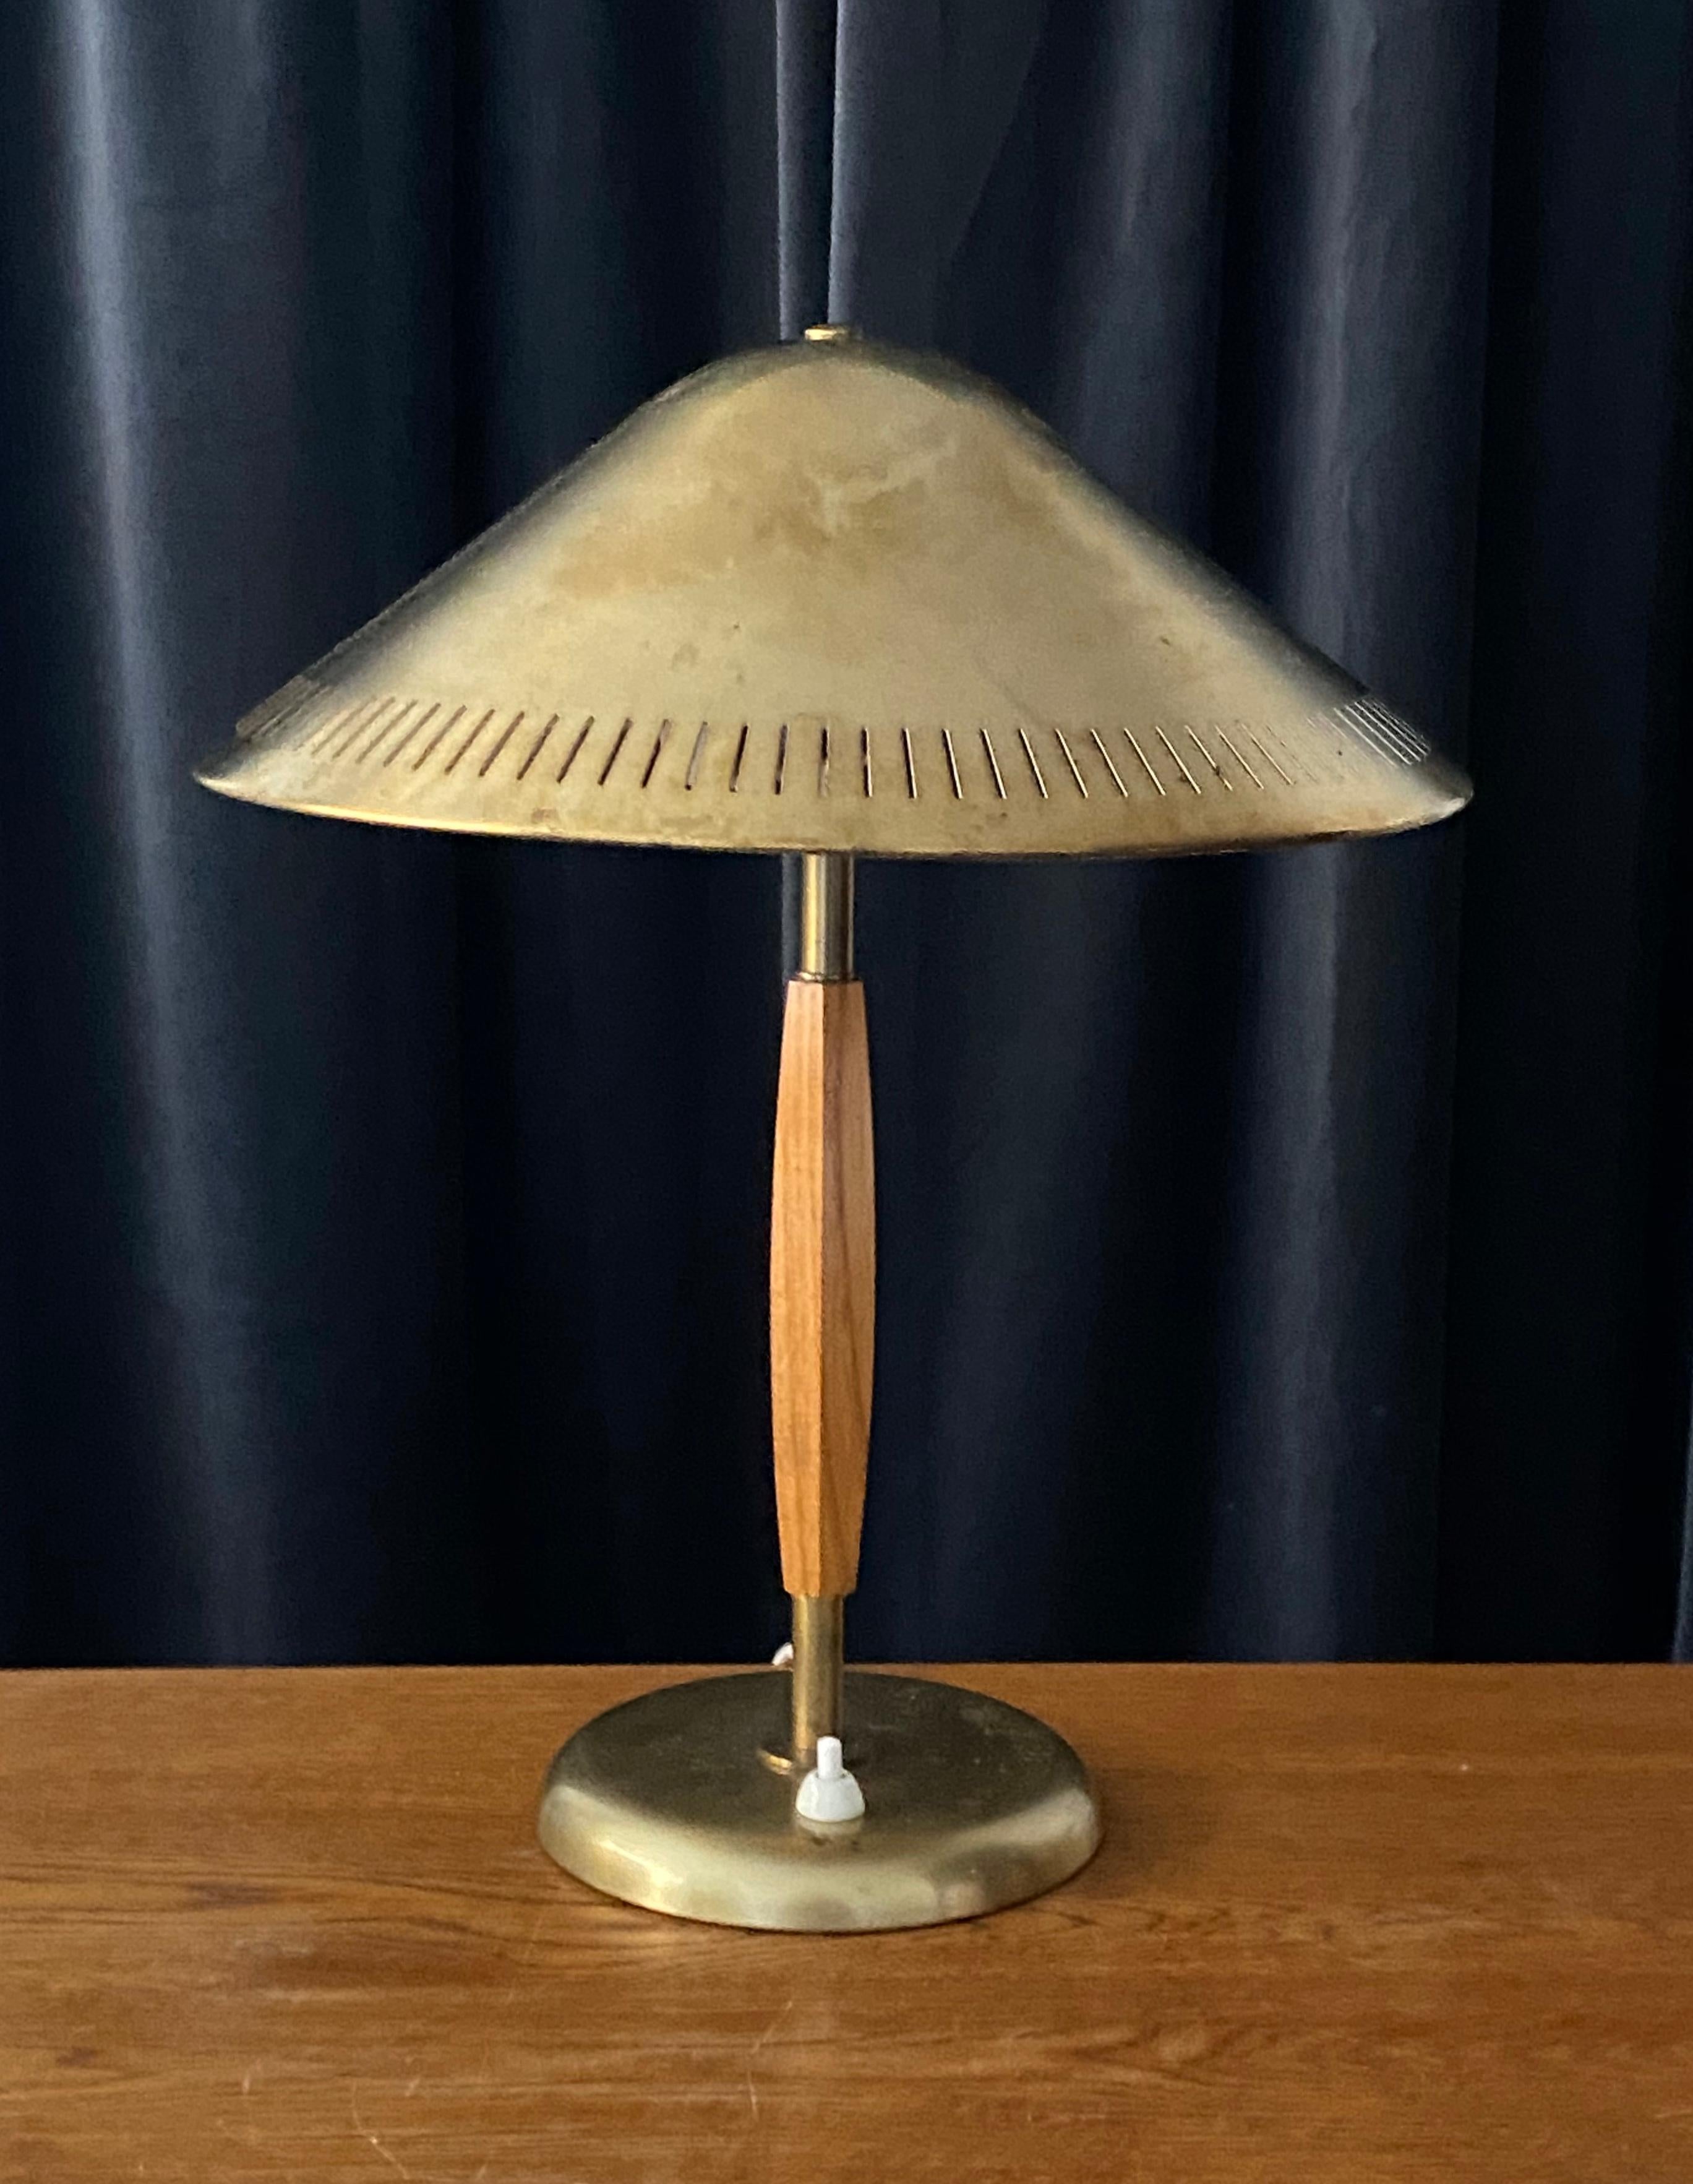 A modernist table lamp or desk light. Produced by the iconic Swedish lamp maker Böhlmarks, circa 1940. Design attributed to Harald Notini.

Features a finely sculpted lacquered wood handle on a brass rod and base, brass screen.

Other designers